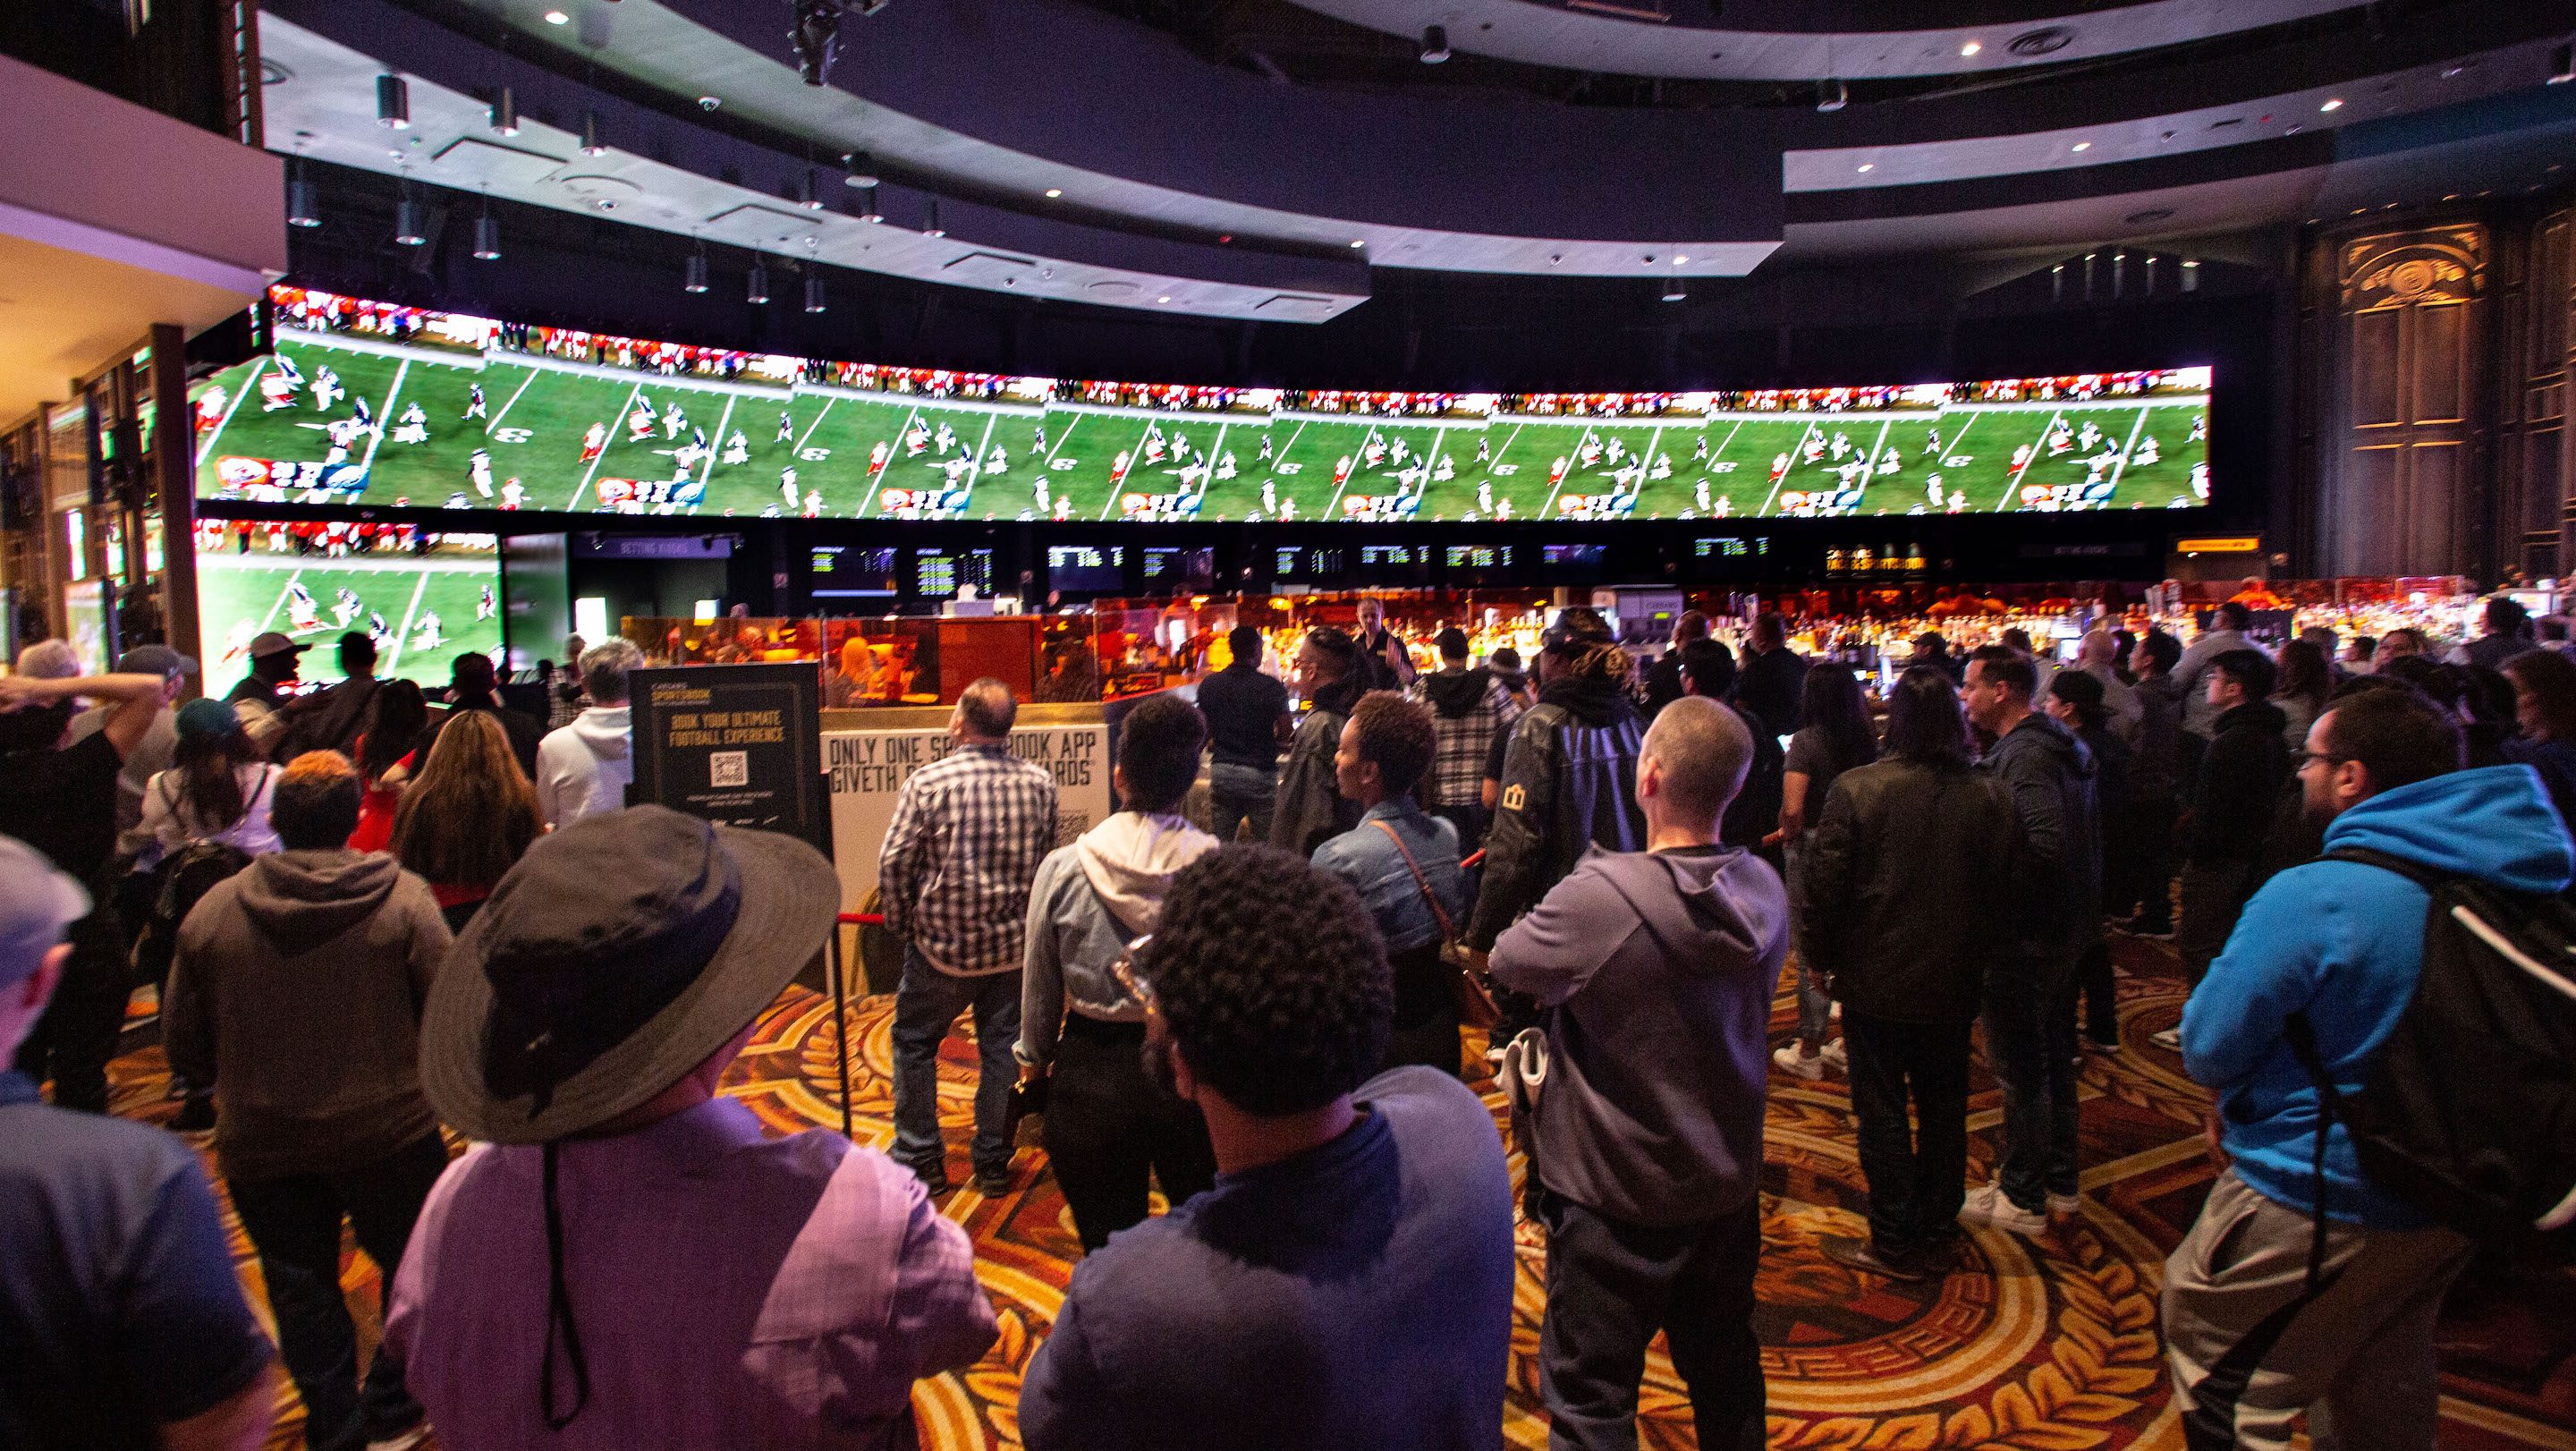 How Much Of The Sports Betting Market Can ESPN Bet Capture